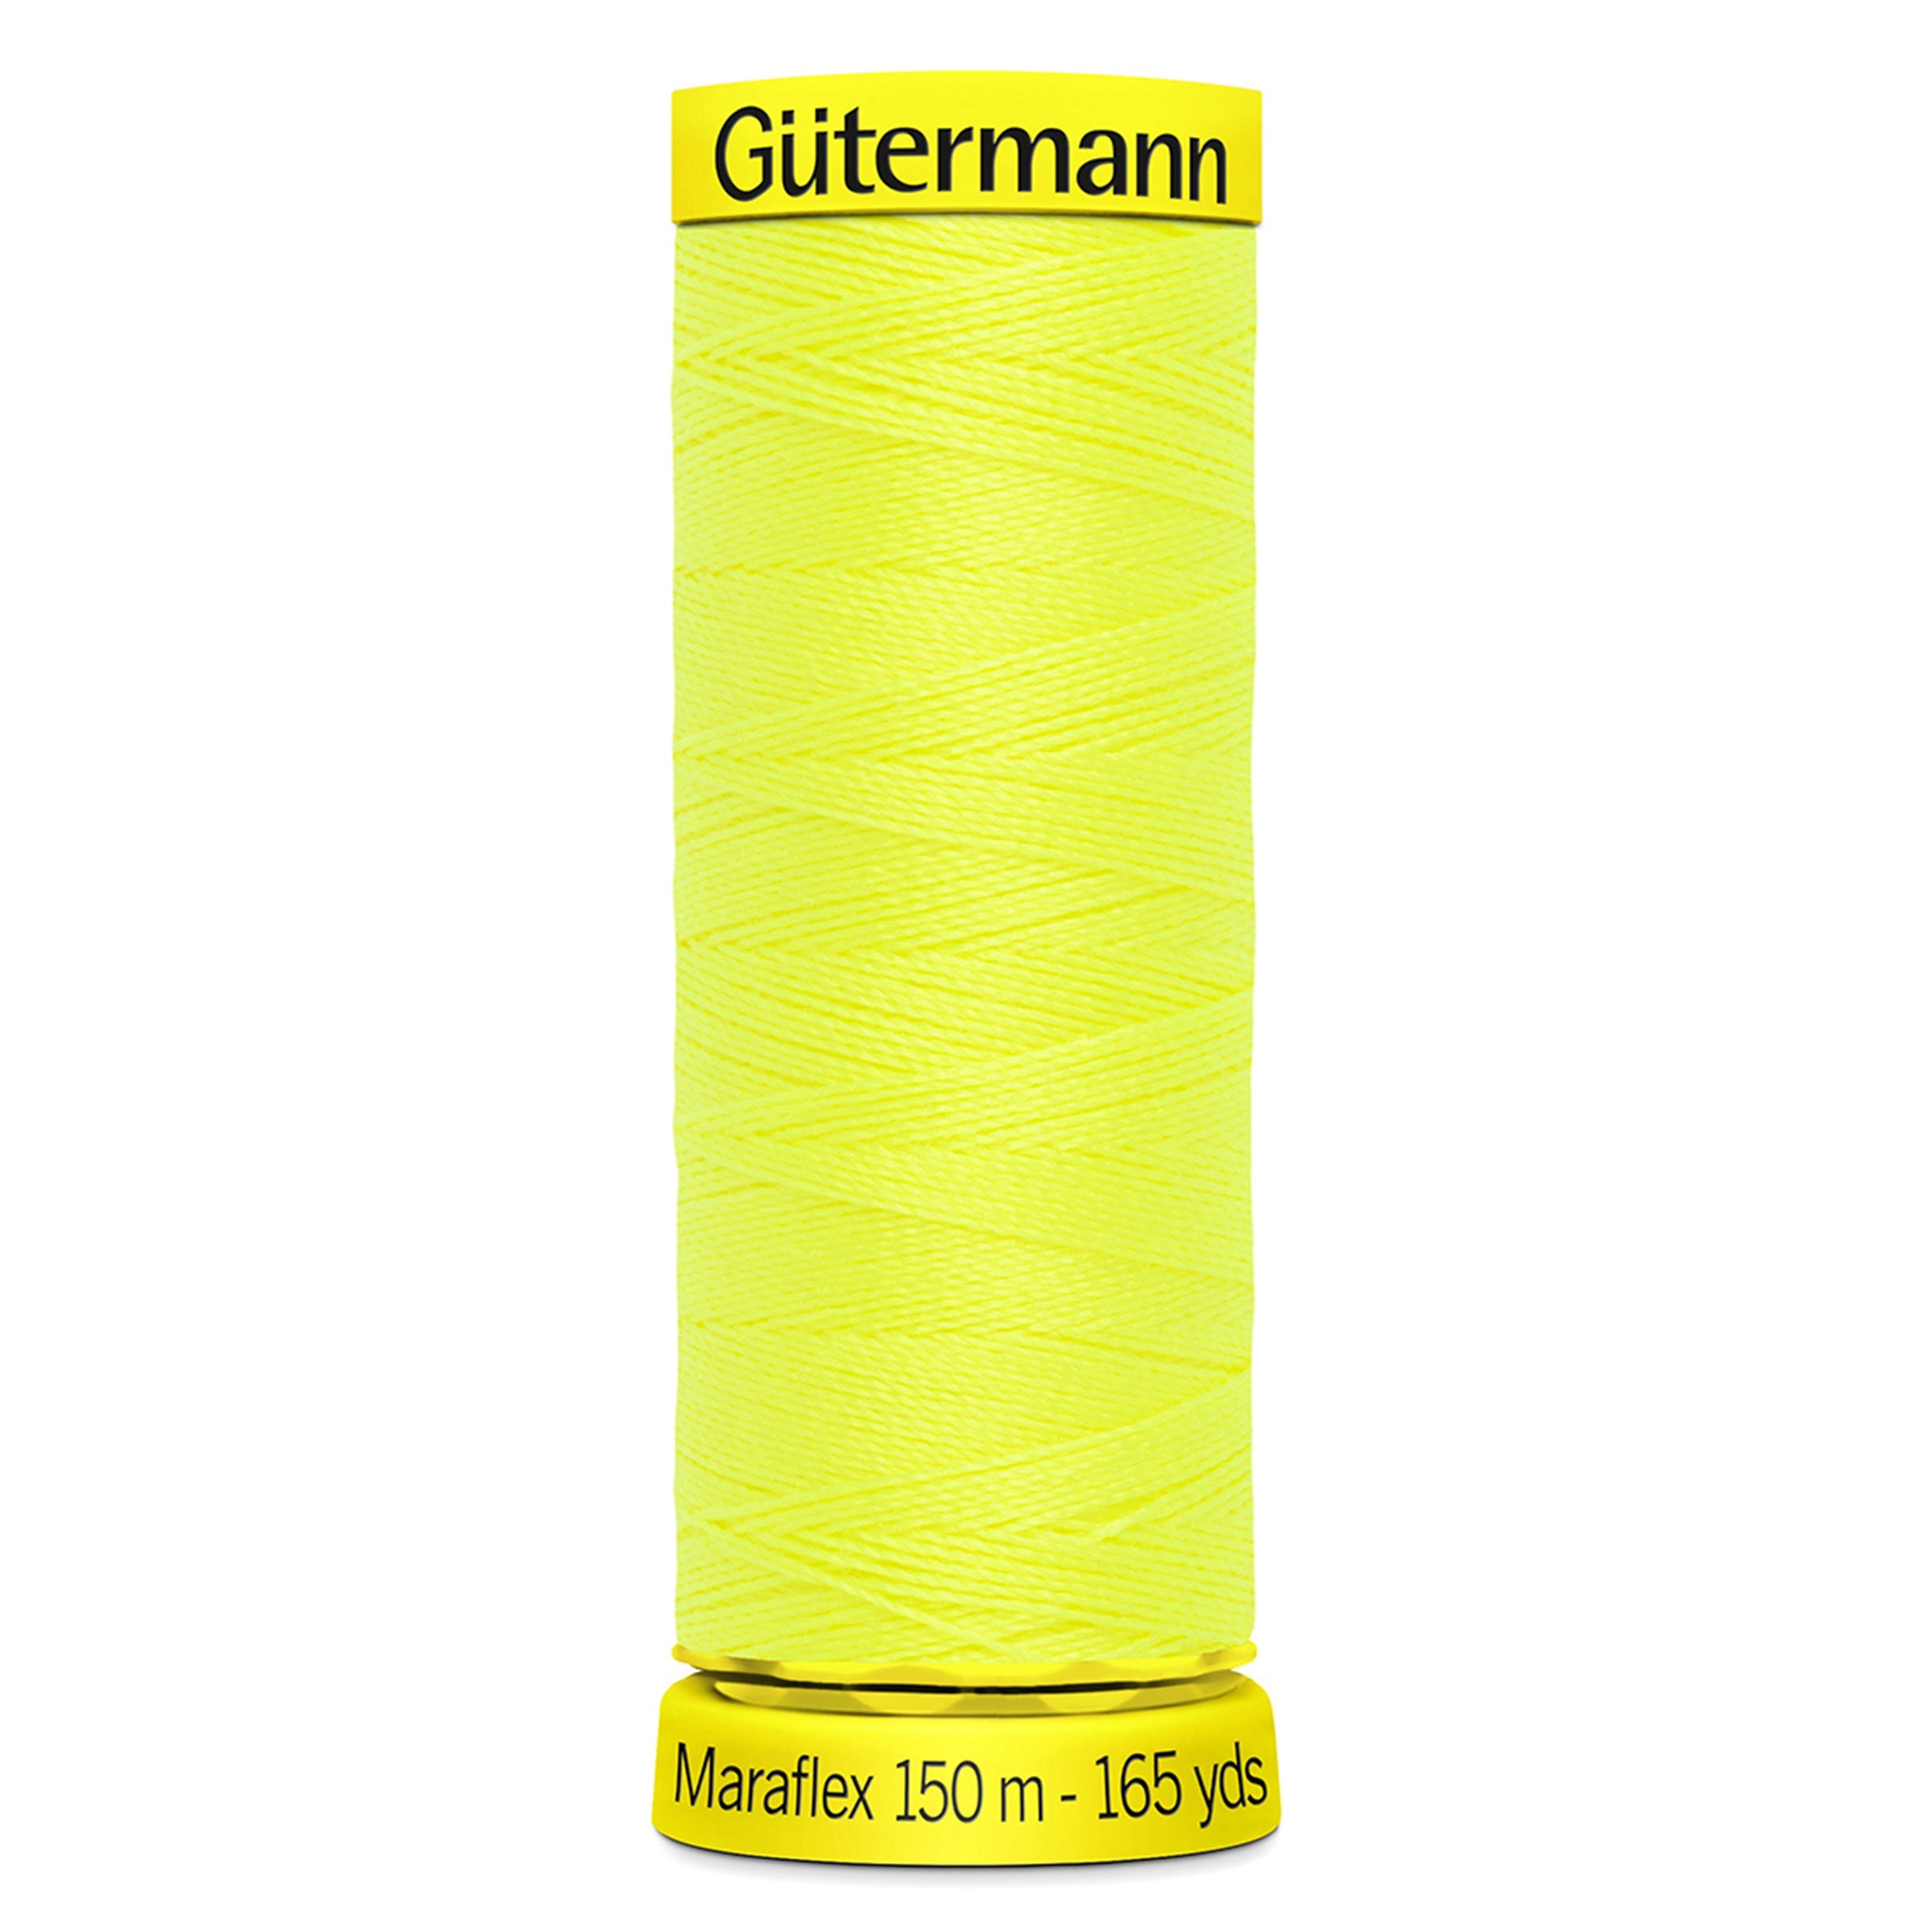 Gutermann Maraflex Stretchy Sewing Thread 150m colour 3835 from Jaycotts Sewing Supplies